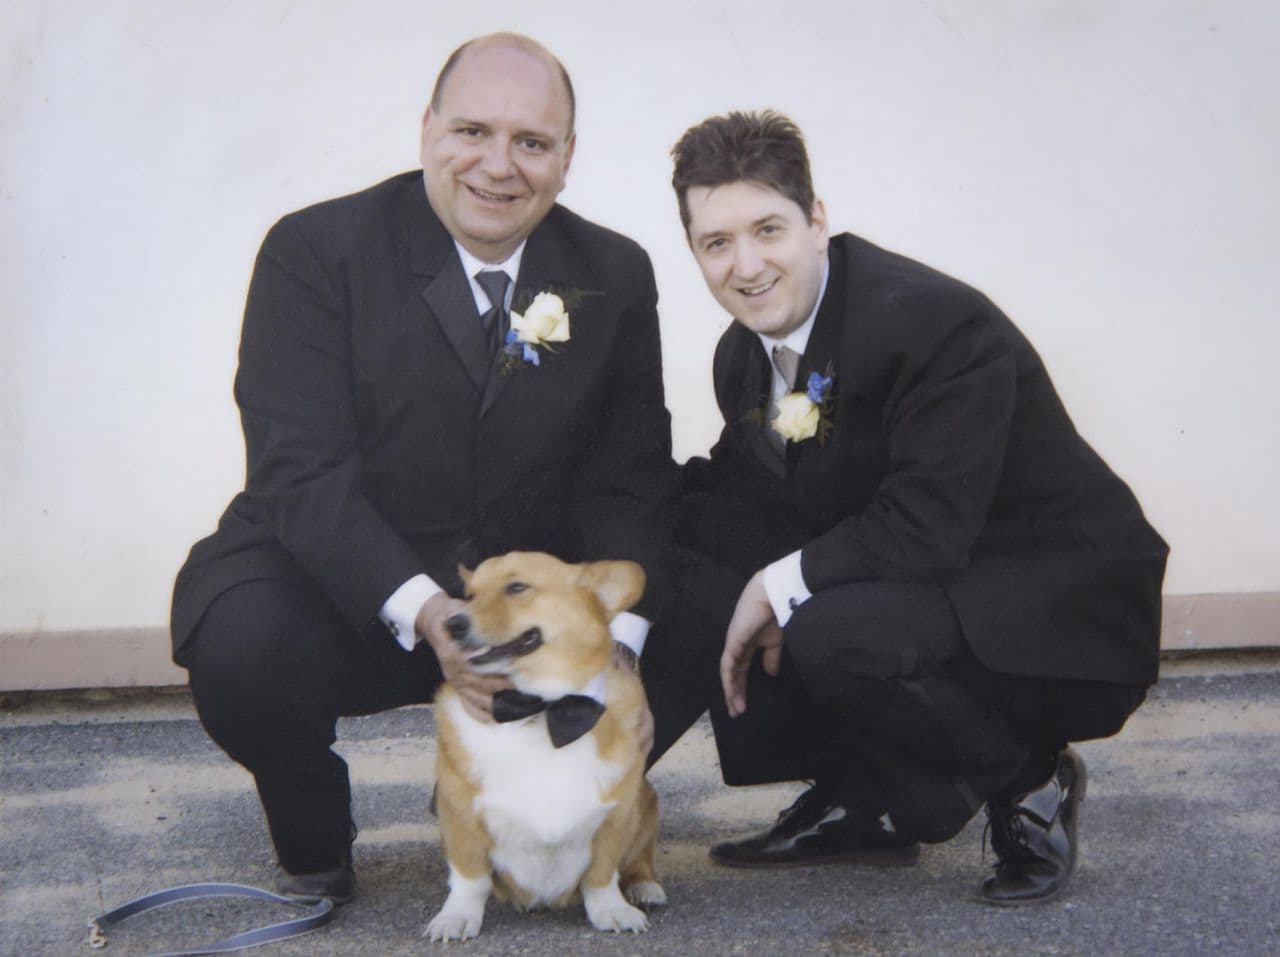 Marlin Collingwood, left, and Gary Girton kneel with one of their corgis. The Medford couple had married on a beach in Provincetown less than two years after same-sex marriage was legalized in Massachusetts. (Courtesy Marlin Collingwood)